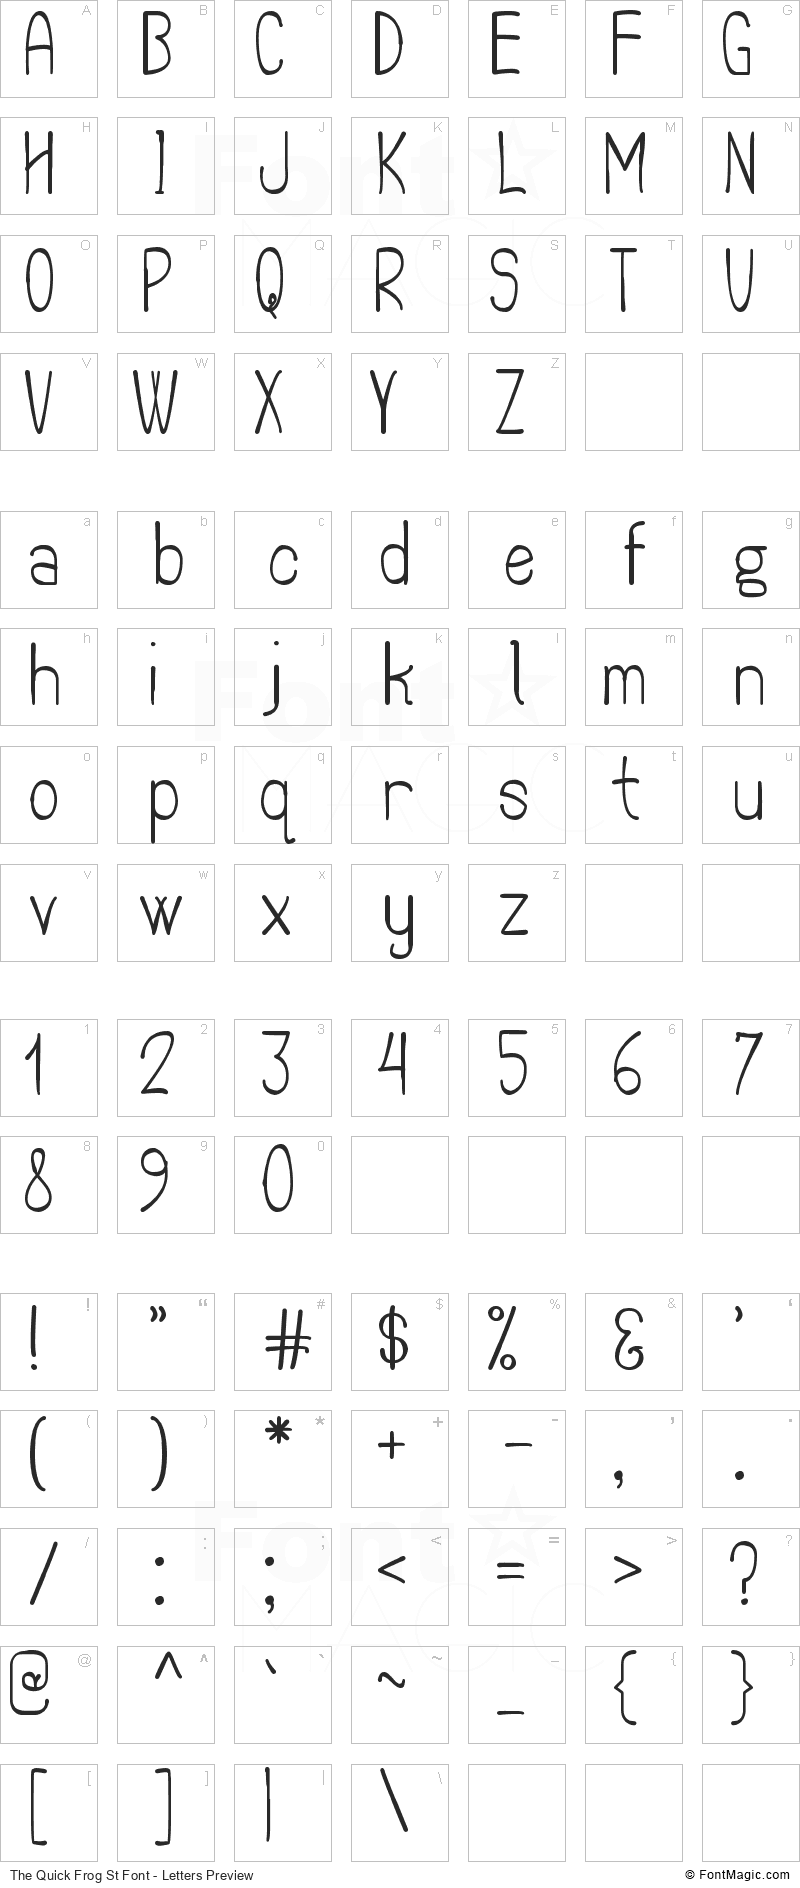 The Quick Frog St Font - All Latters Preview Chart